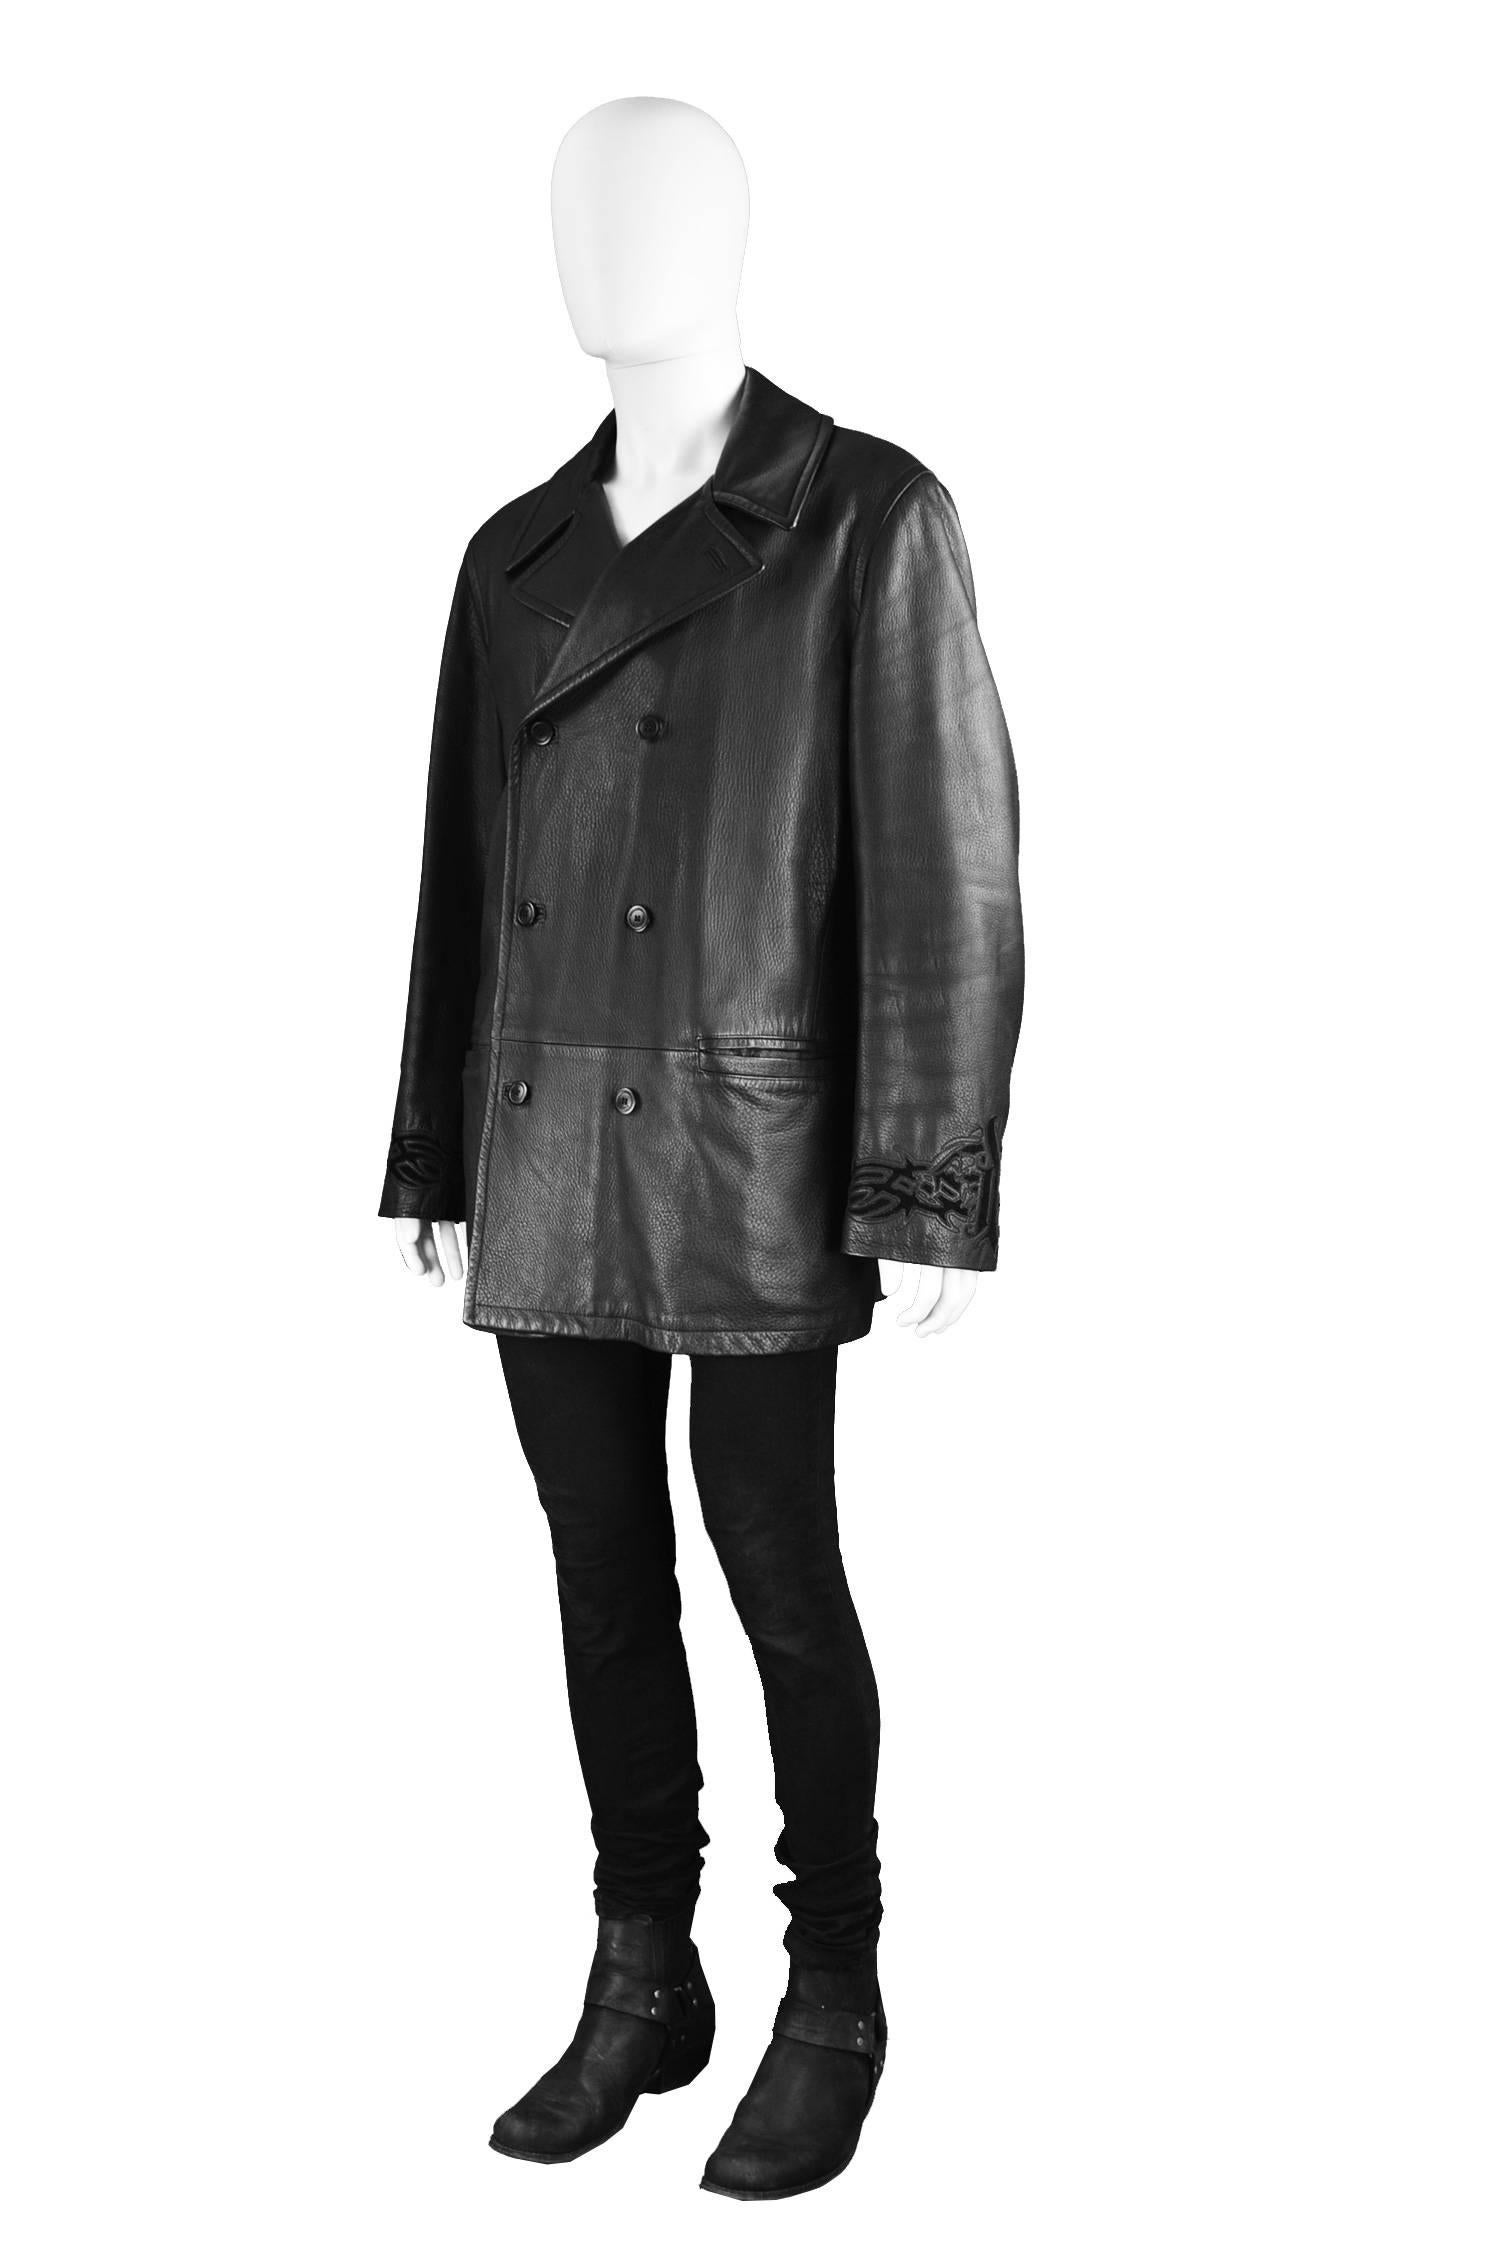 Gianni Versace Men's Black Leather Double Breasted Jacket, A/W 2002  For Sale 4